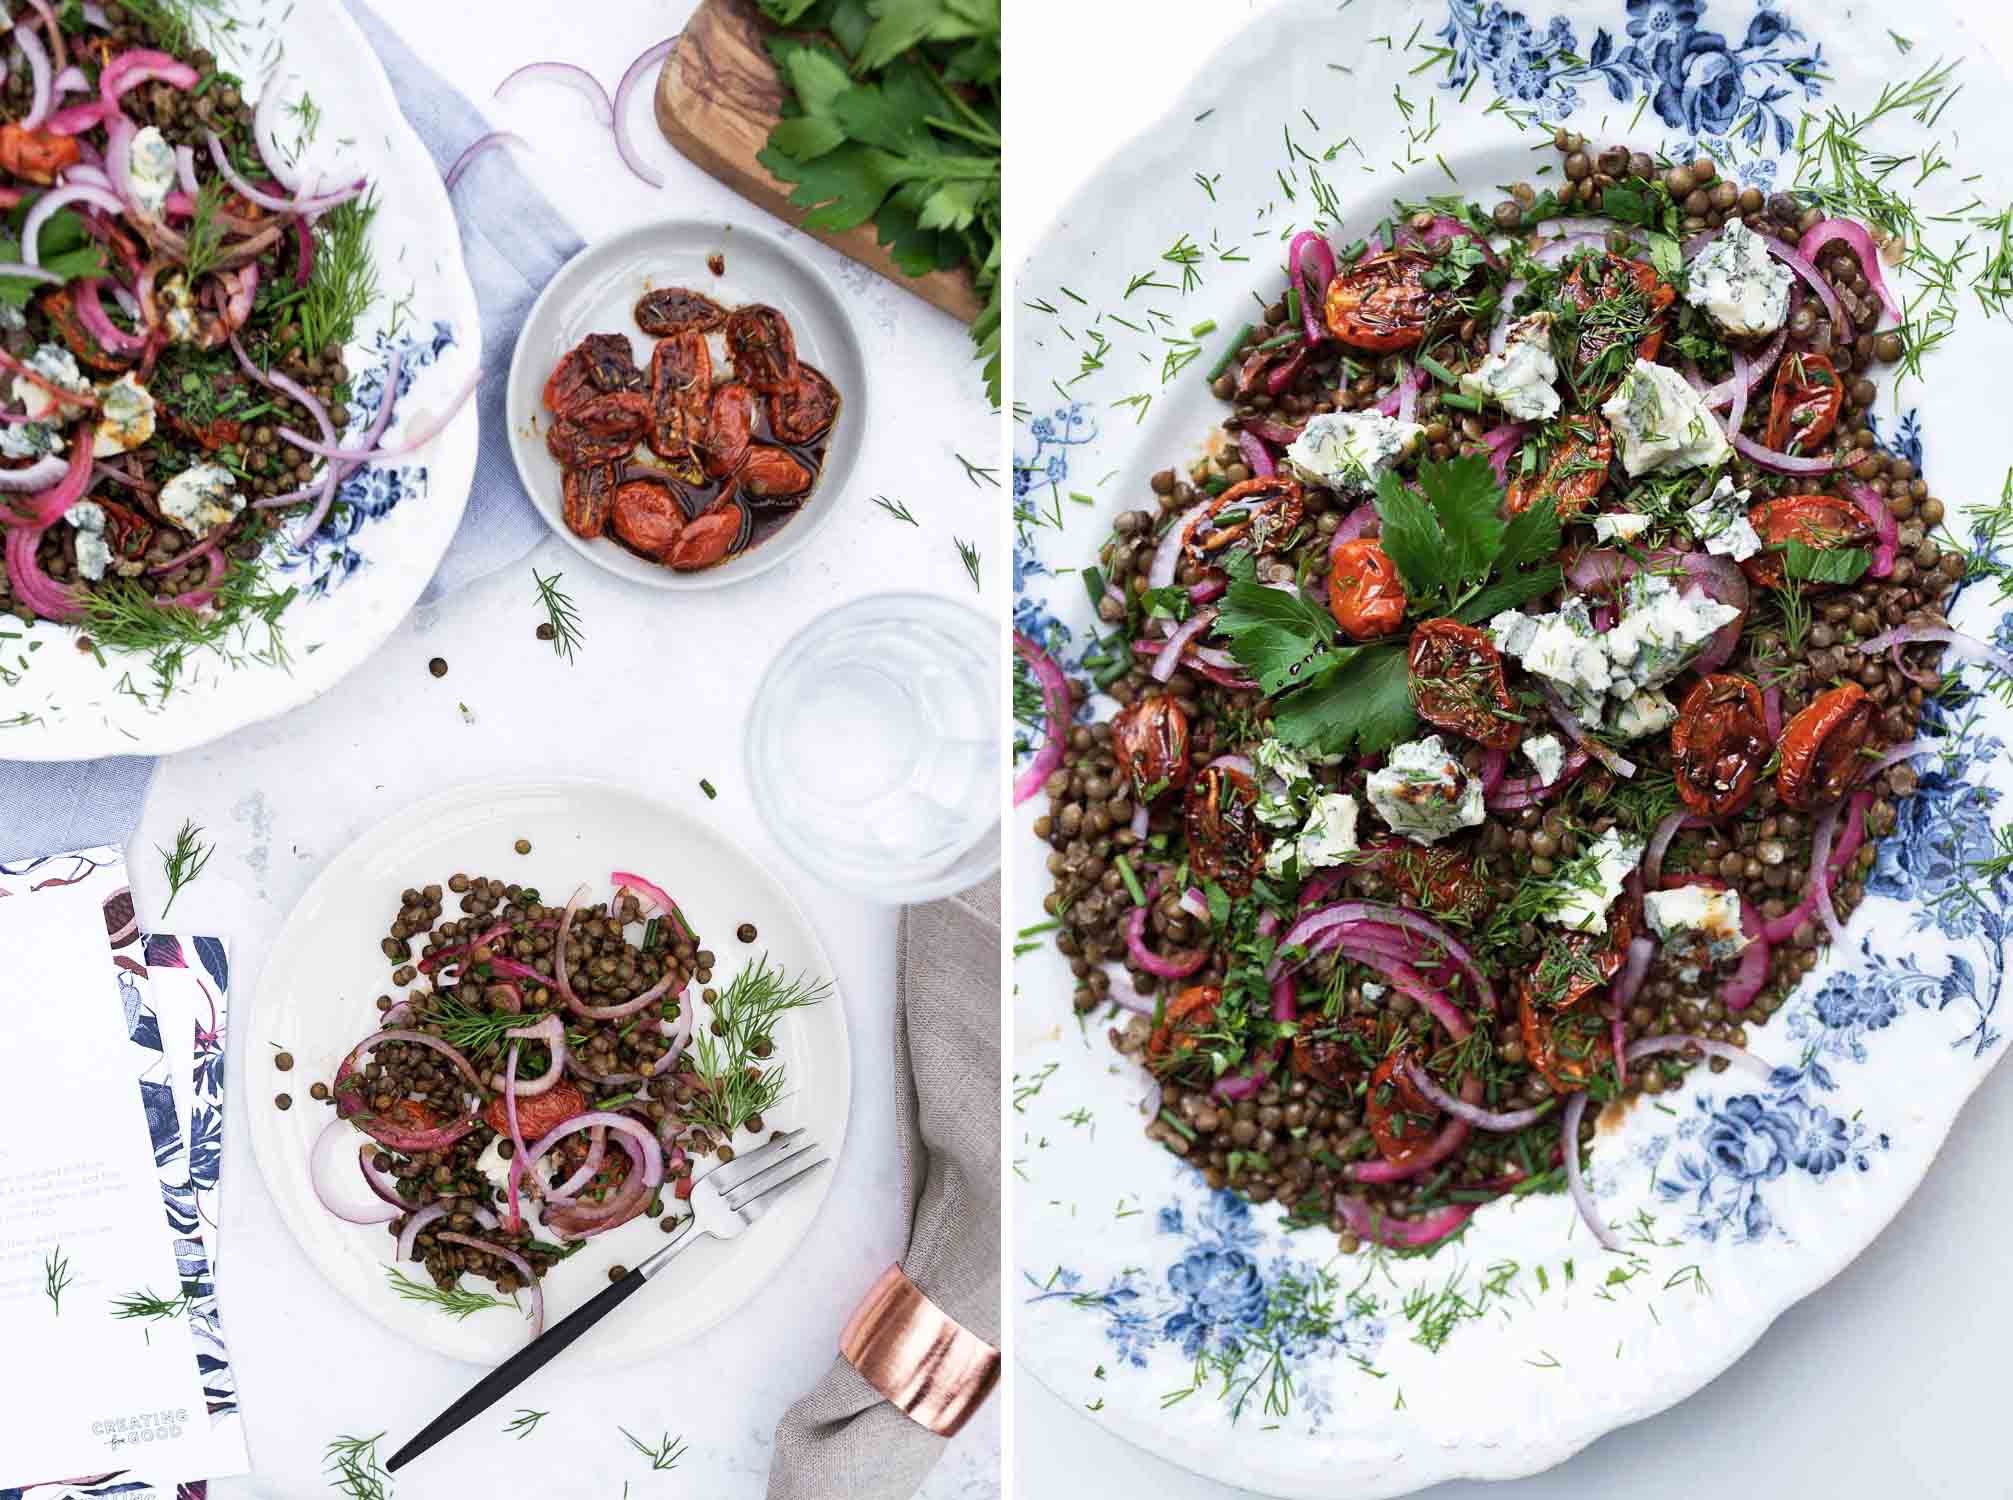 Yotam Ottolenghi recipe for Castelluccio lentils with tomatoes and Gorgonzola Salad